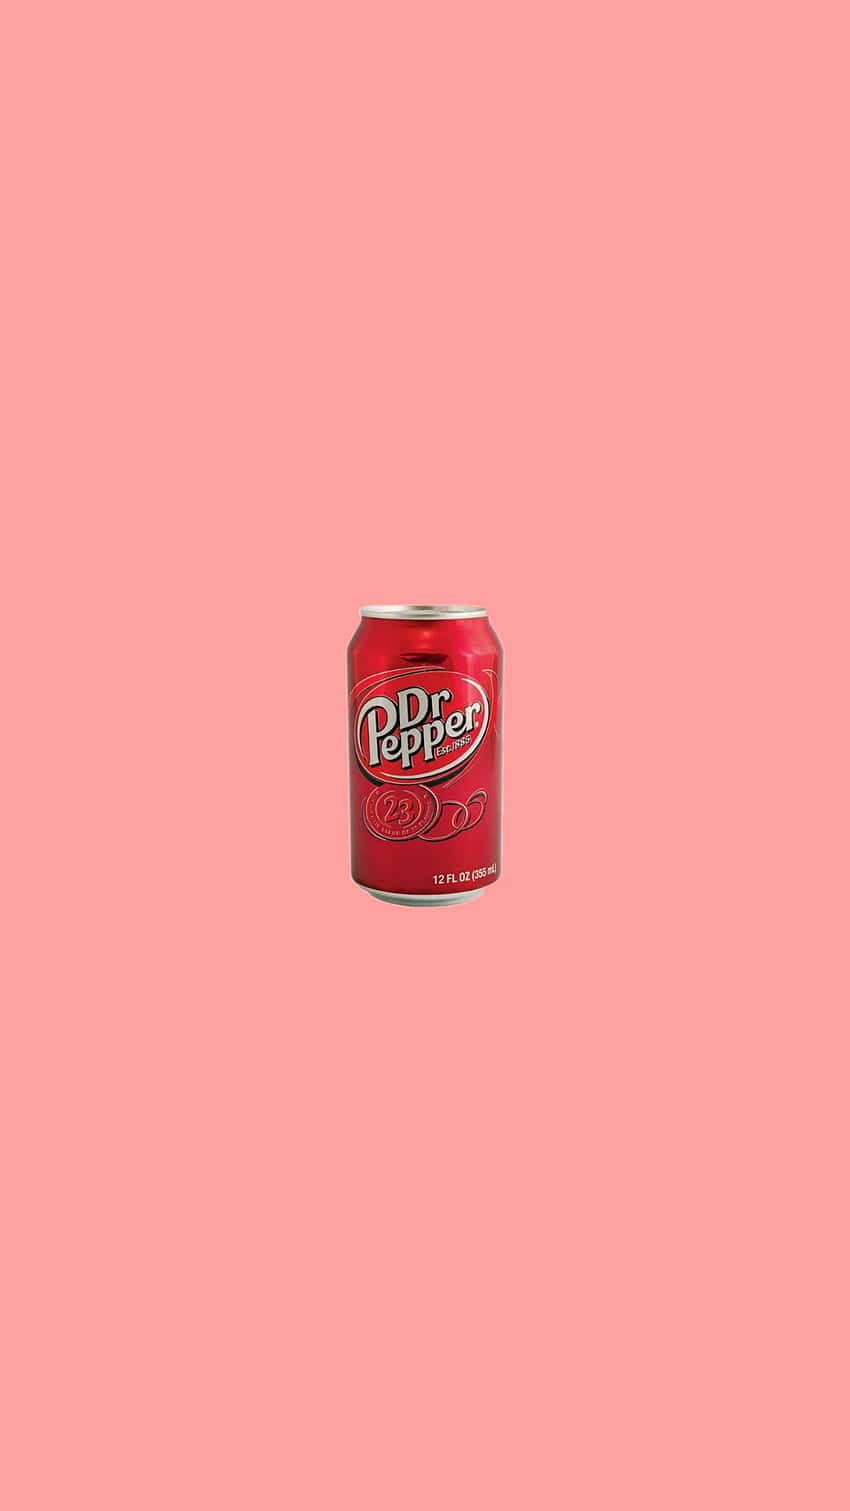 A Can Of Red Bull On A Pink Background Wallpaper